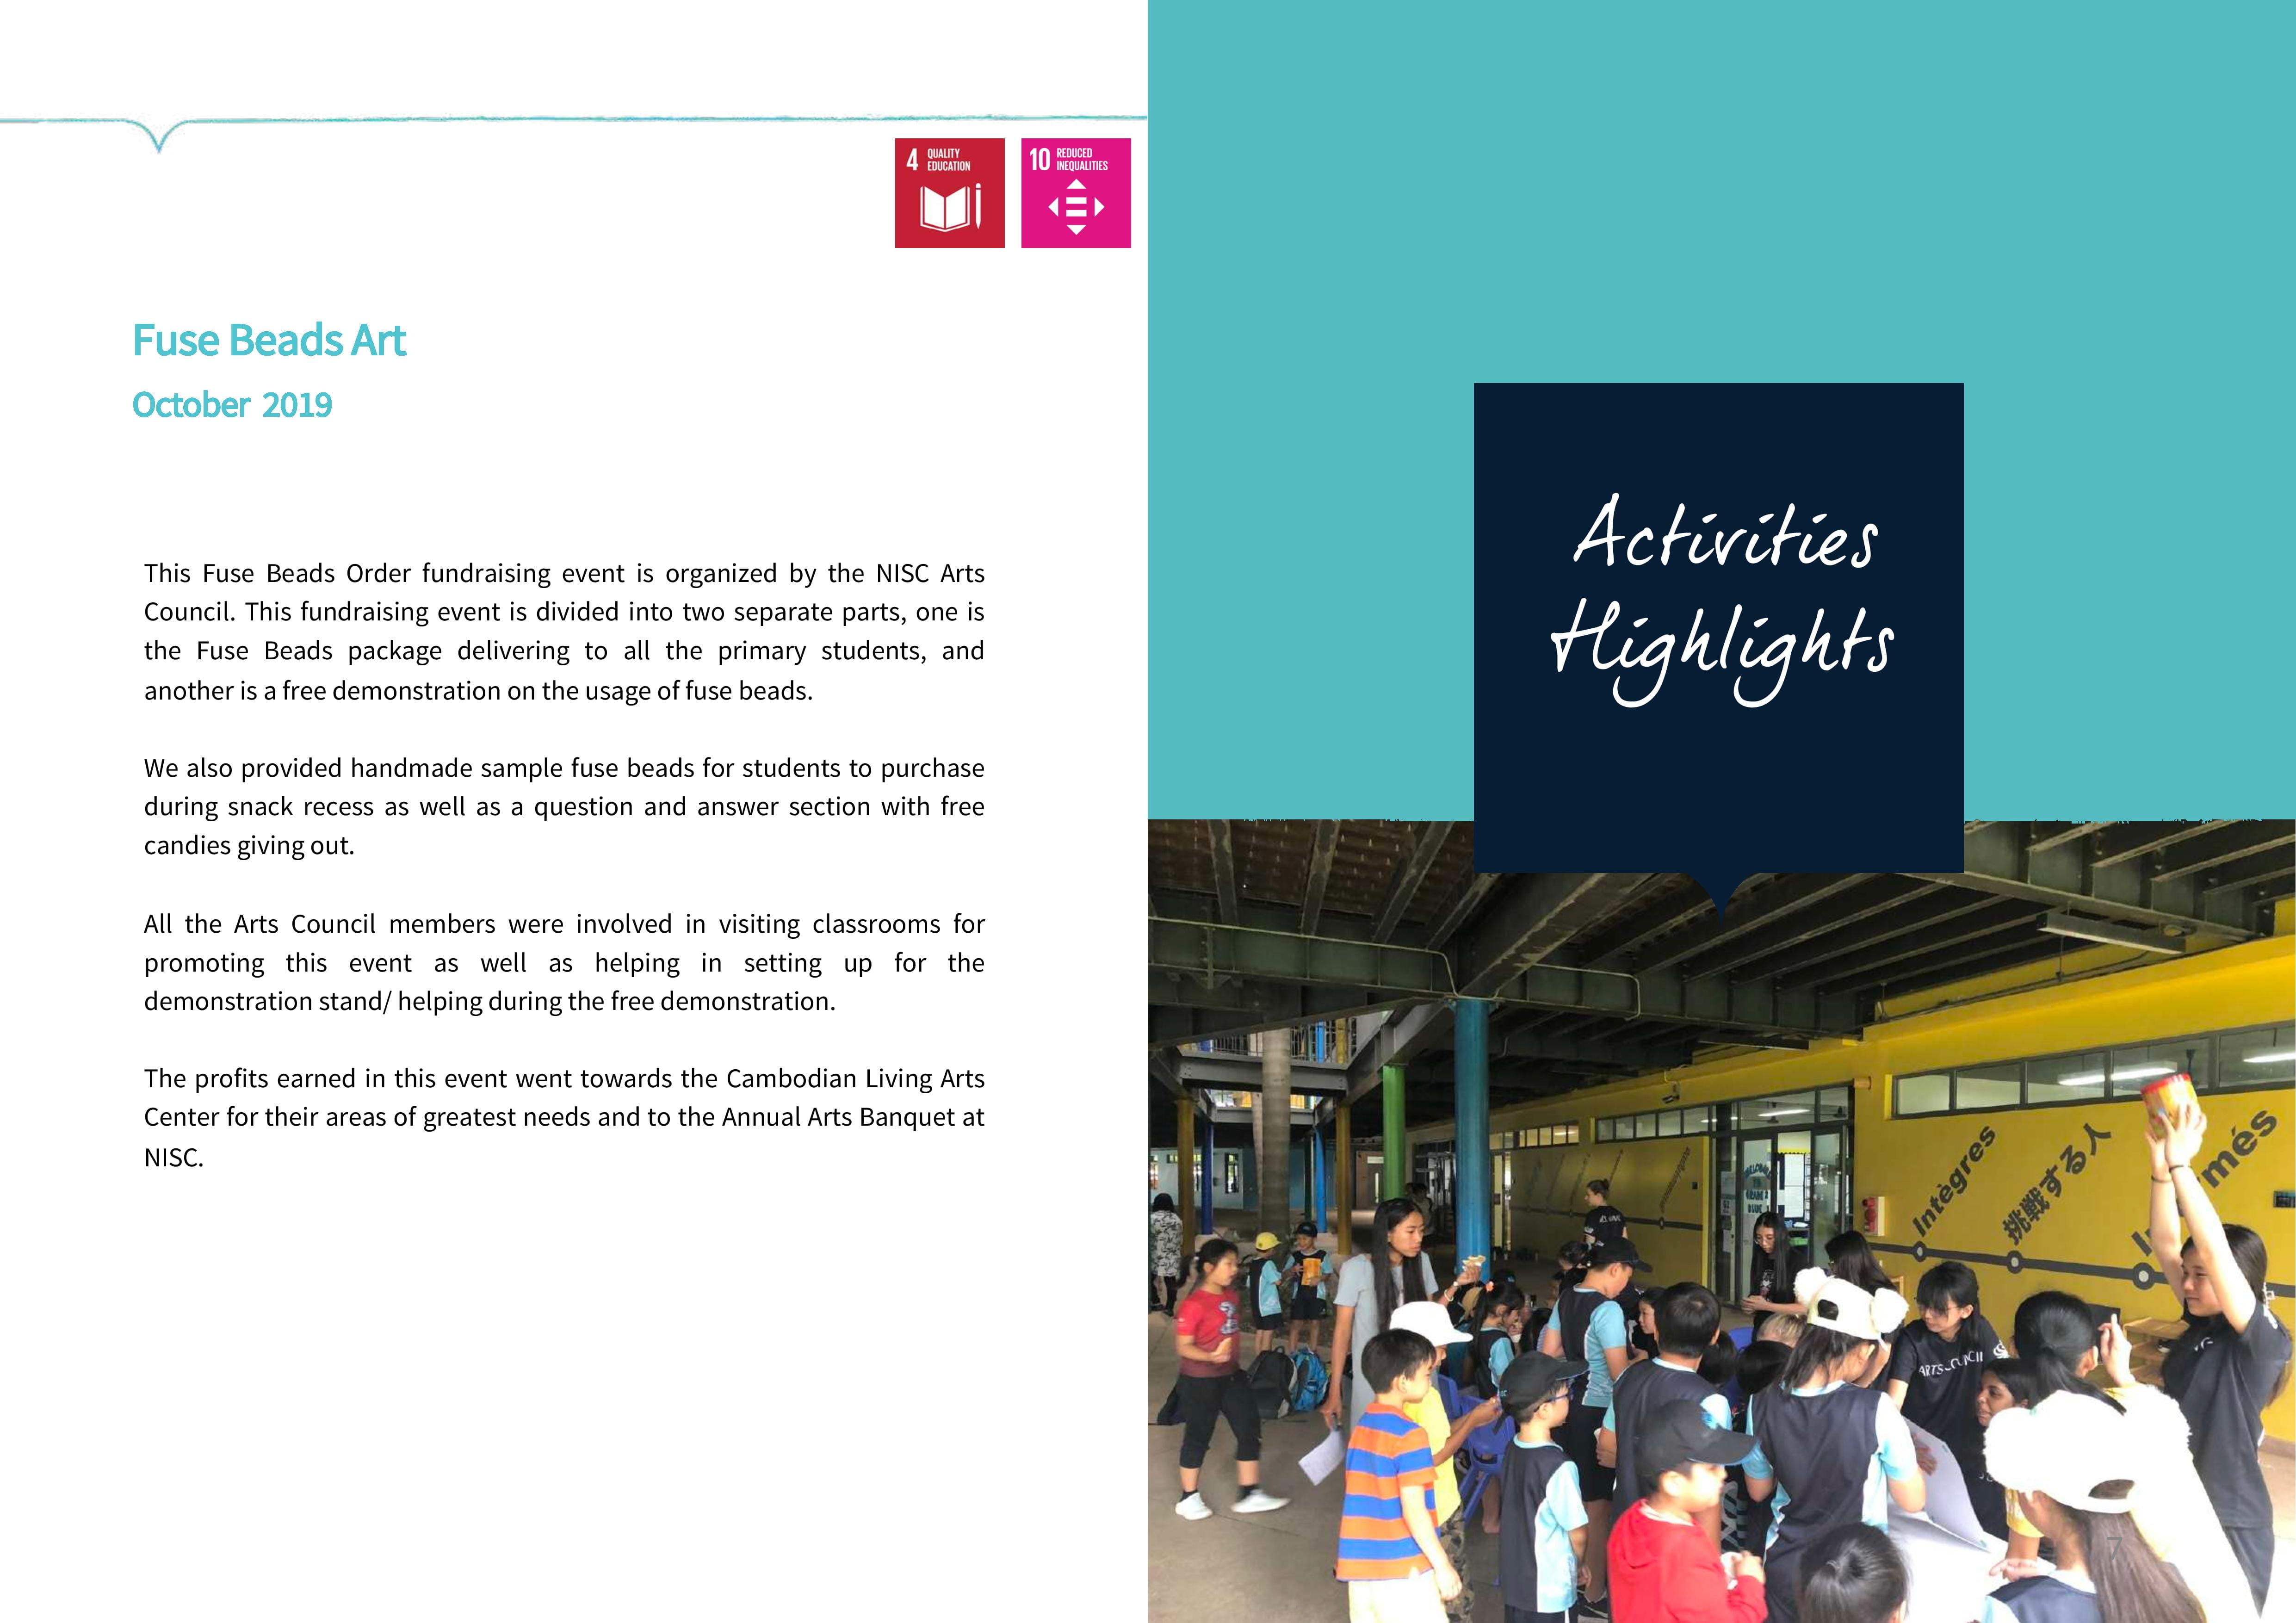 Share A Dream platform launched at Northbridge for social outreach activities-share-a-dream-platform-launched-at-northbridge-for-social-outreach-activities-NISC report term 1 20192020page007